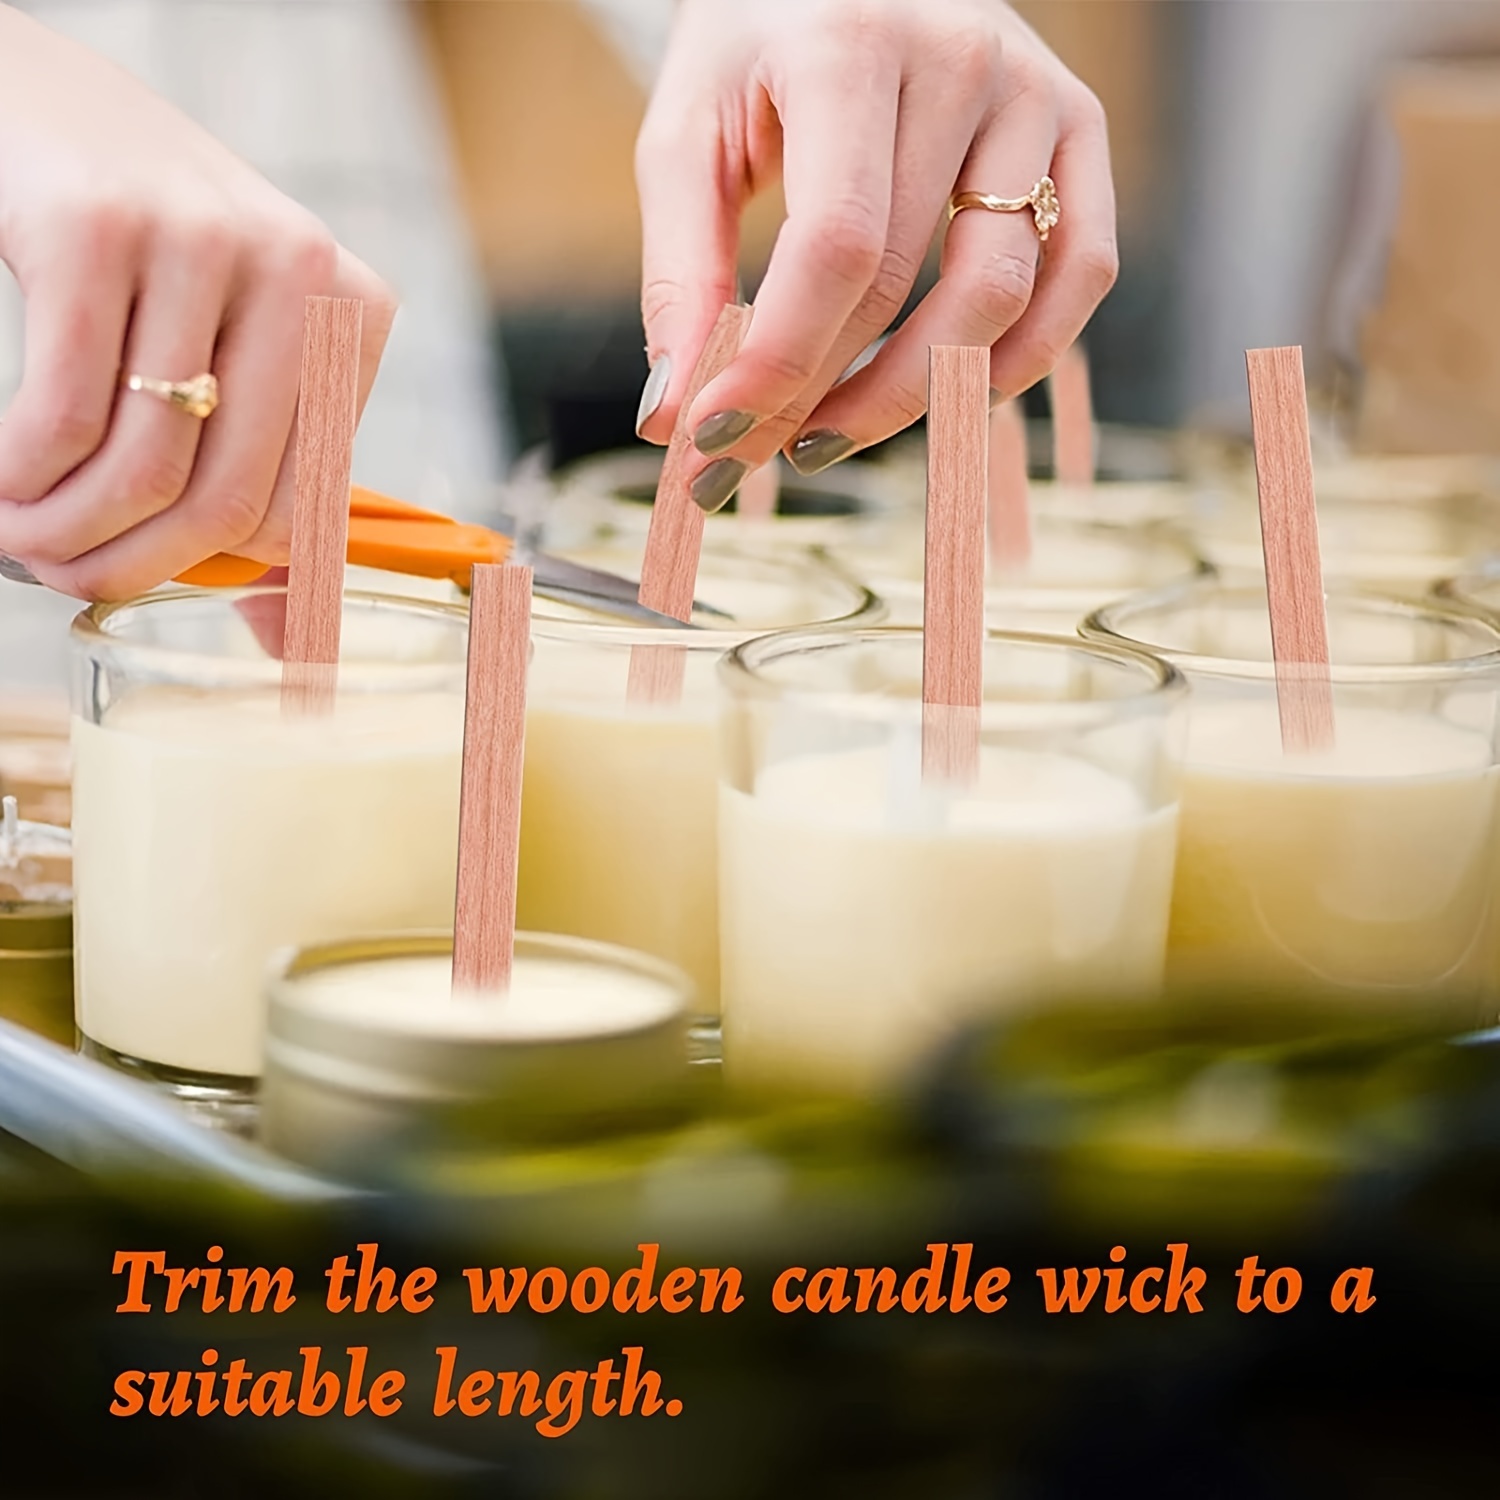 300g Natural Soy Wax Handmade Scented Candle Material 52 Degree Candle Raw  Material Candle Making Supplies